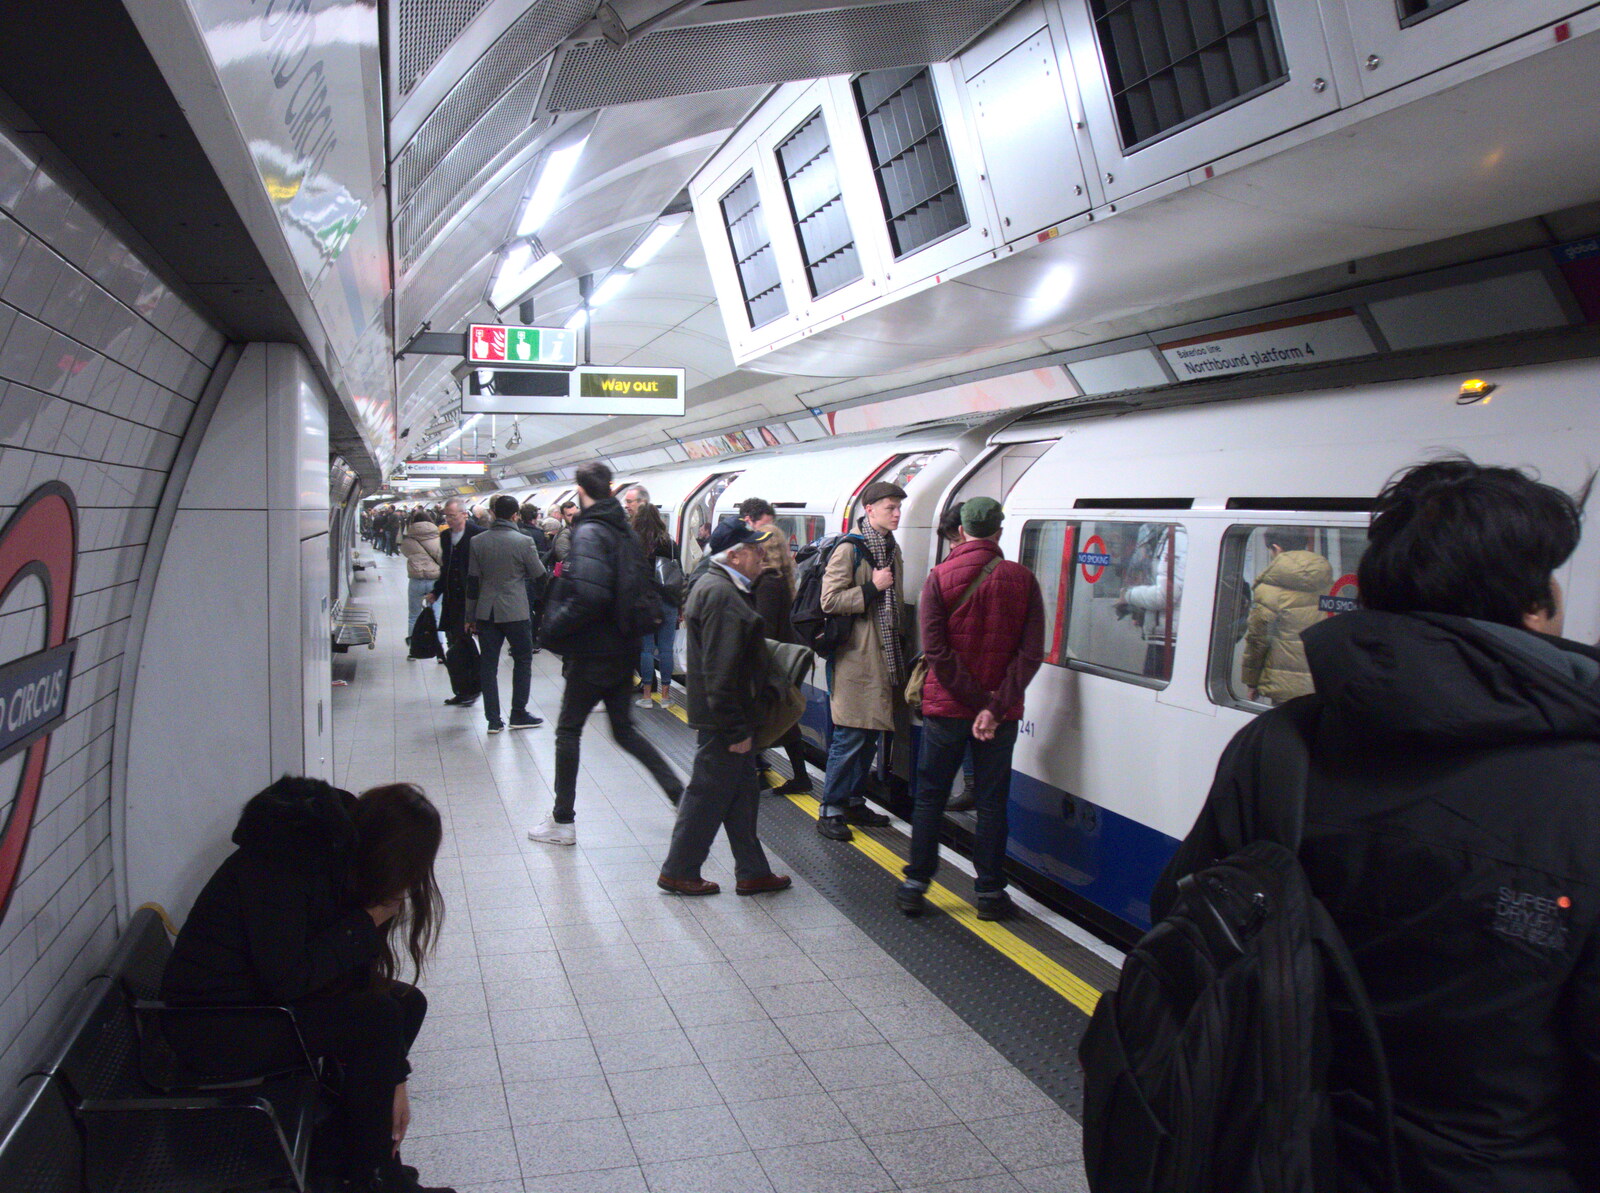 Oxford Circus station from A Small Transport Miscellany, London - 7th January 2020